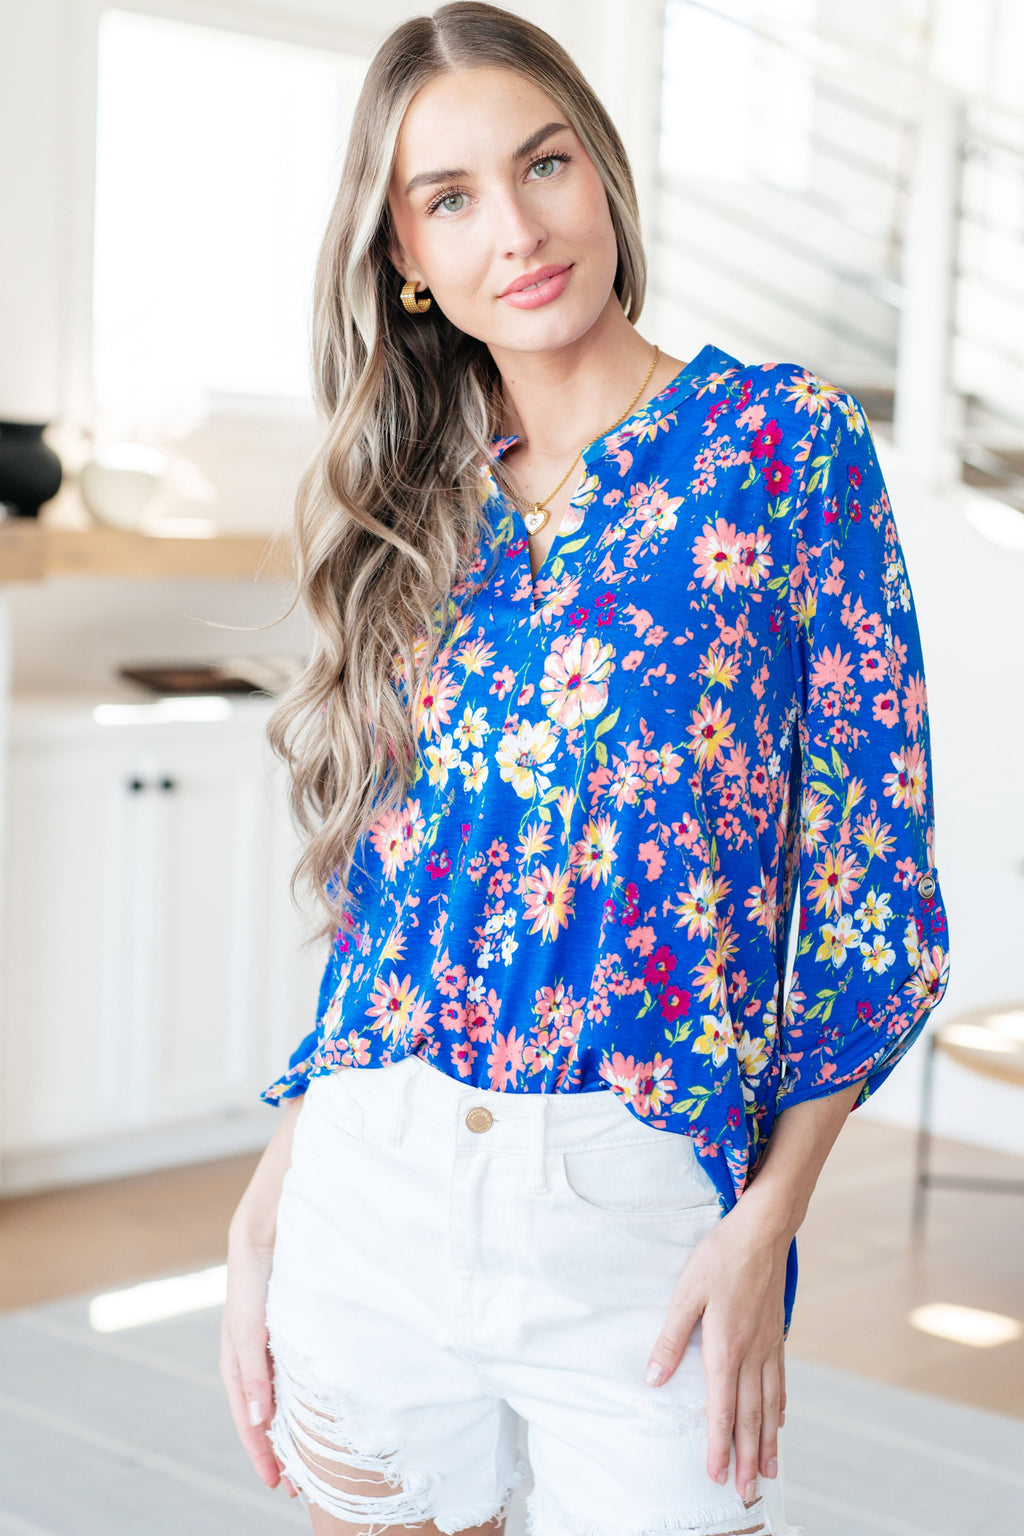 Hazel Blues® |  Lizzy Top in Royal and Blush Floral